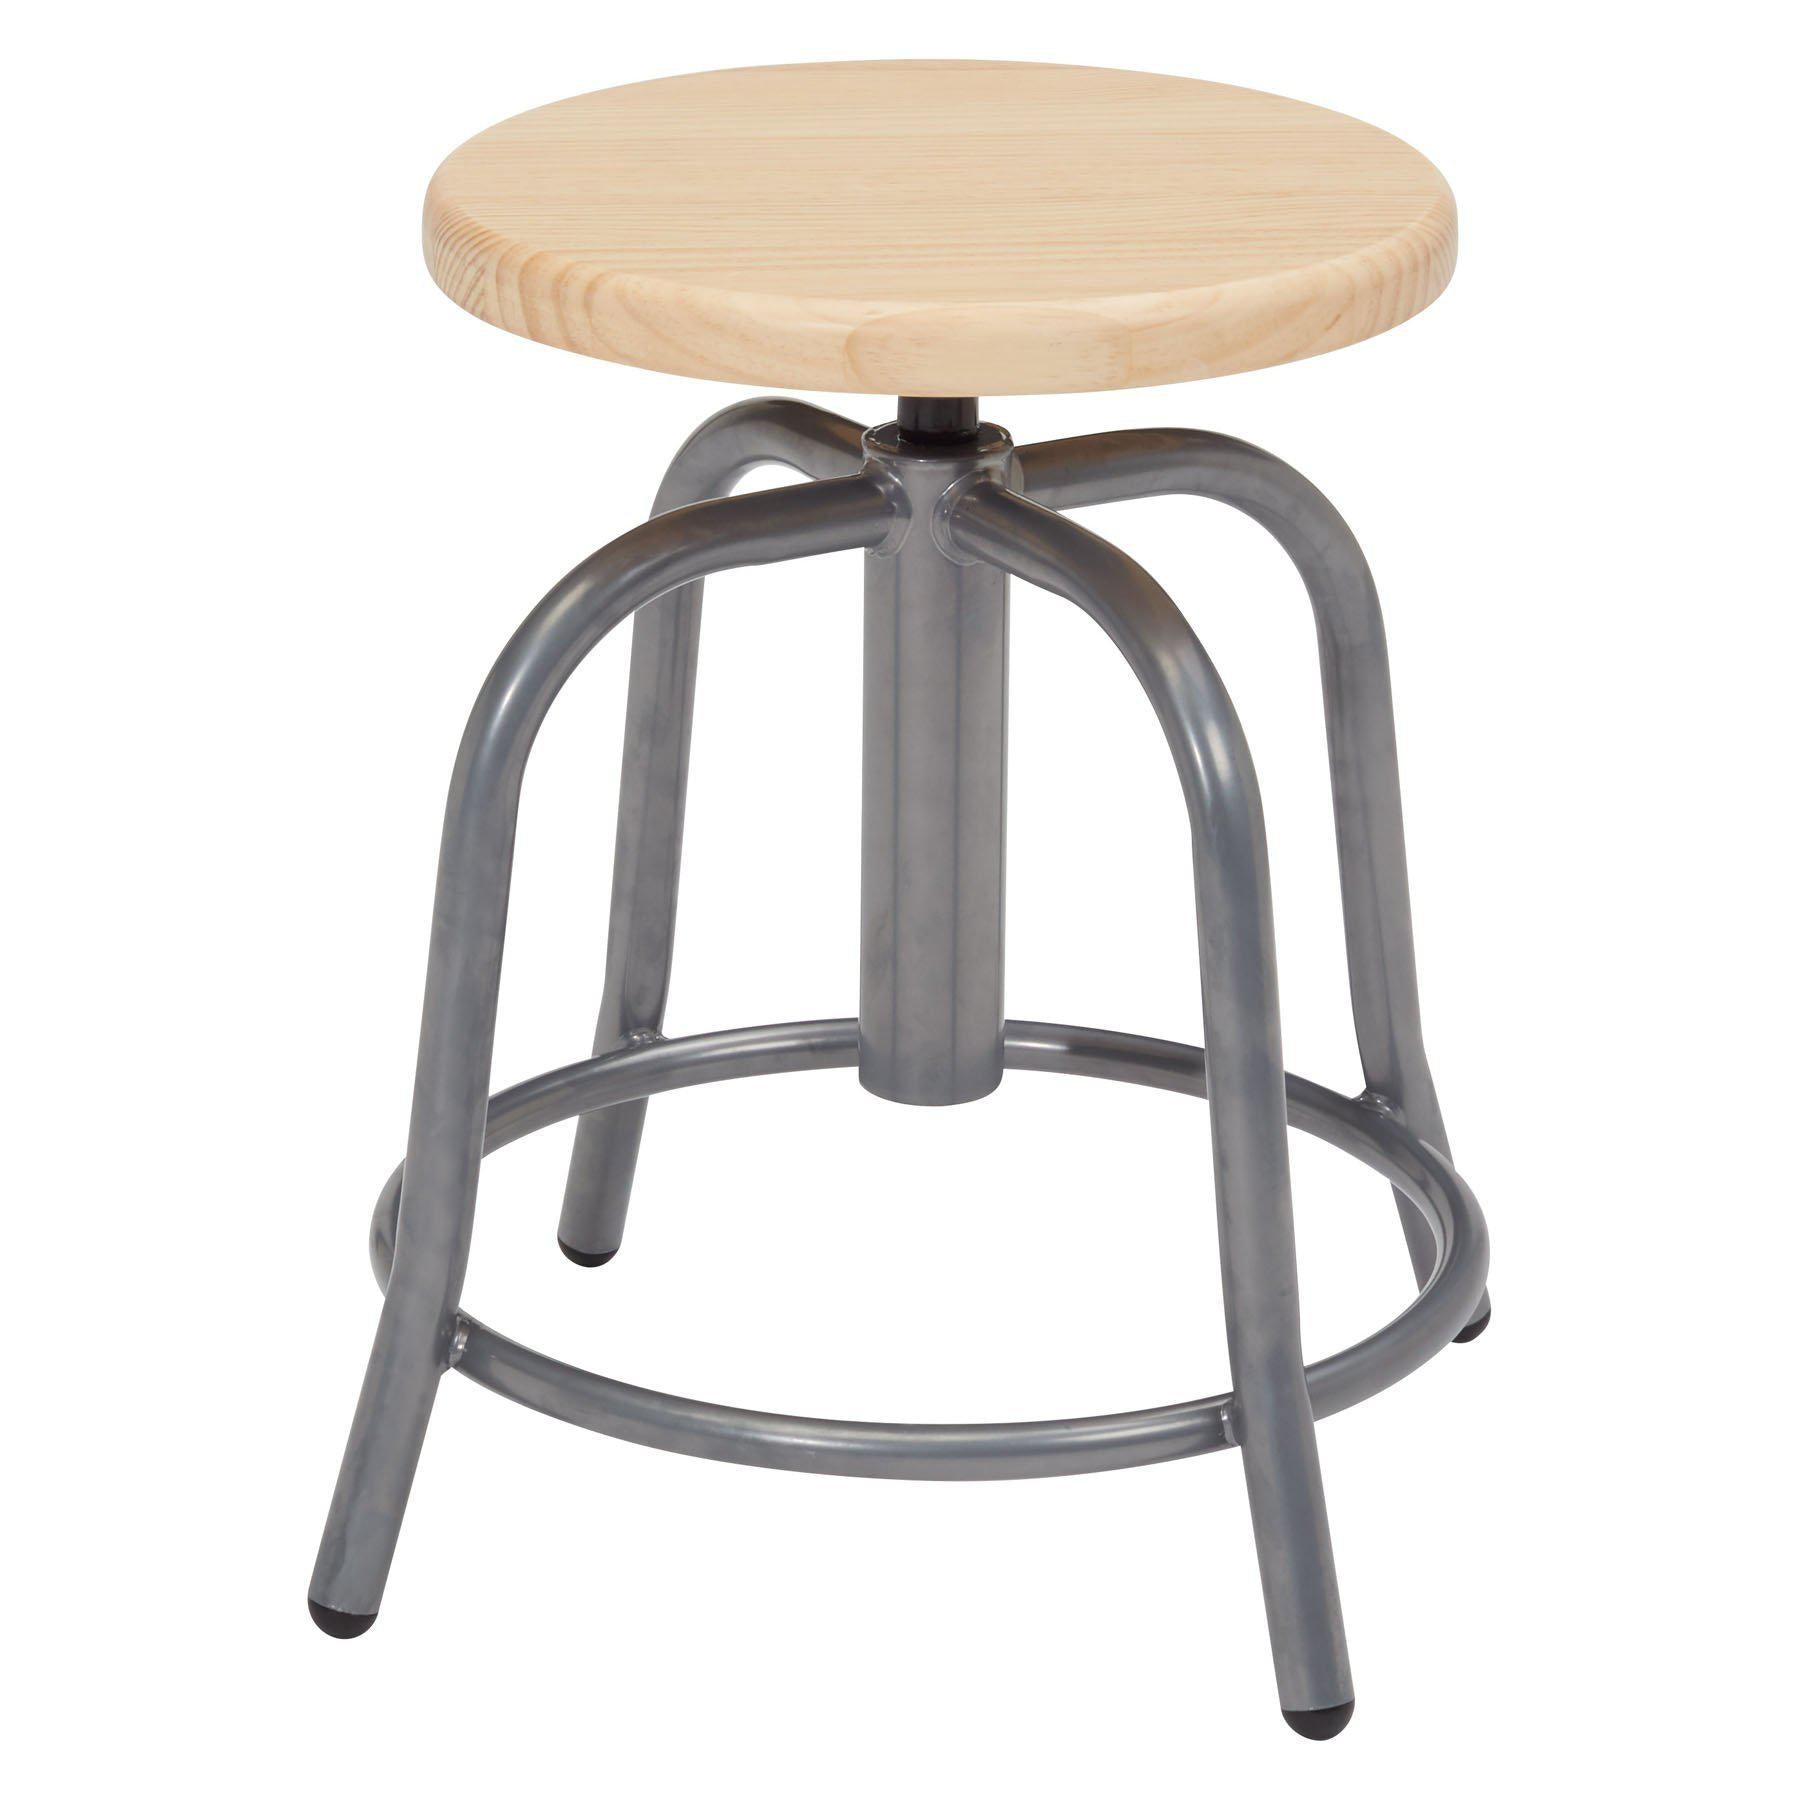 19” - 25” Height Adjustable Swivel Stool, Wooden Seat and Steel Frame-Stools-Grey-